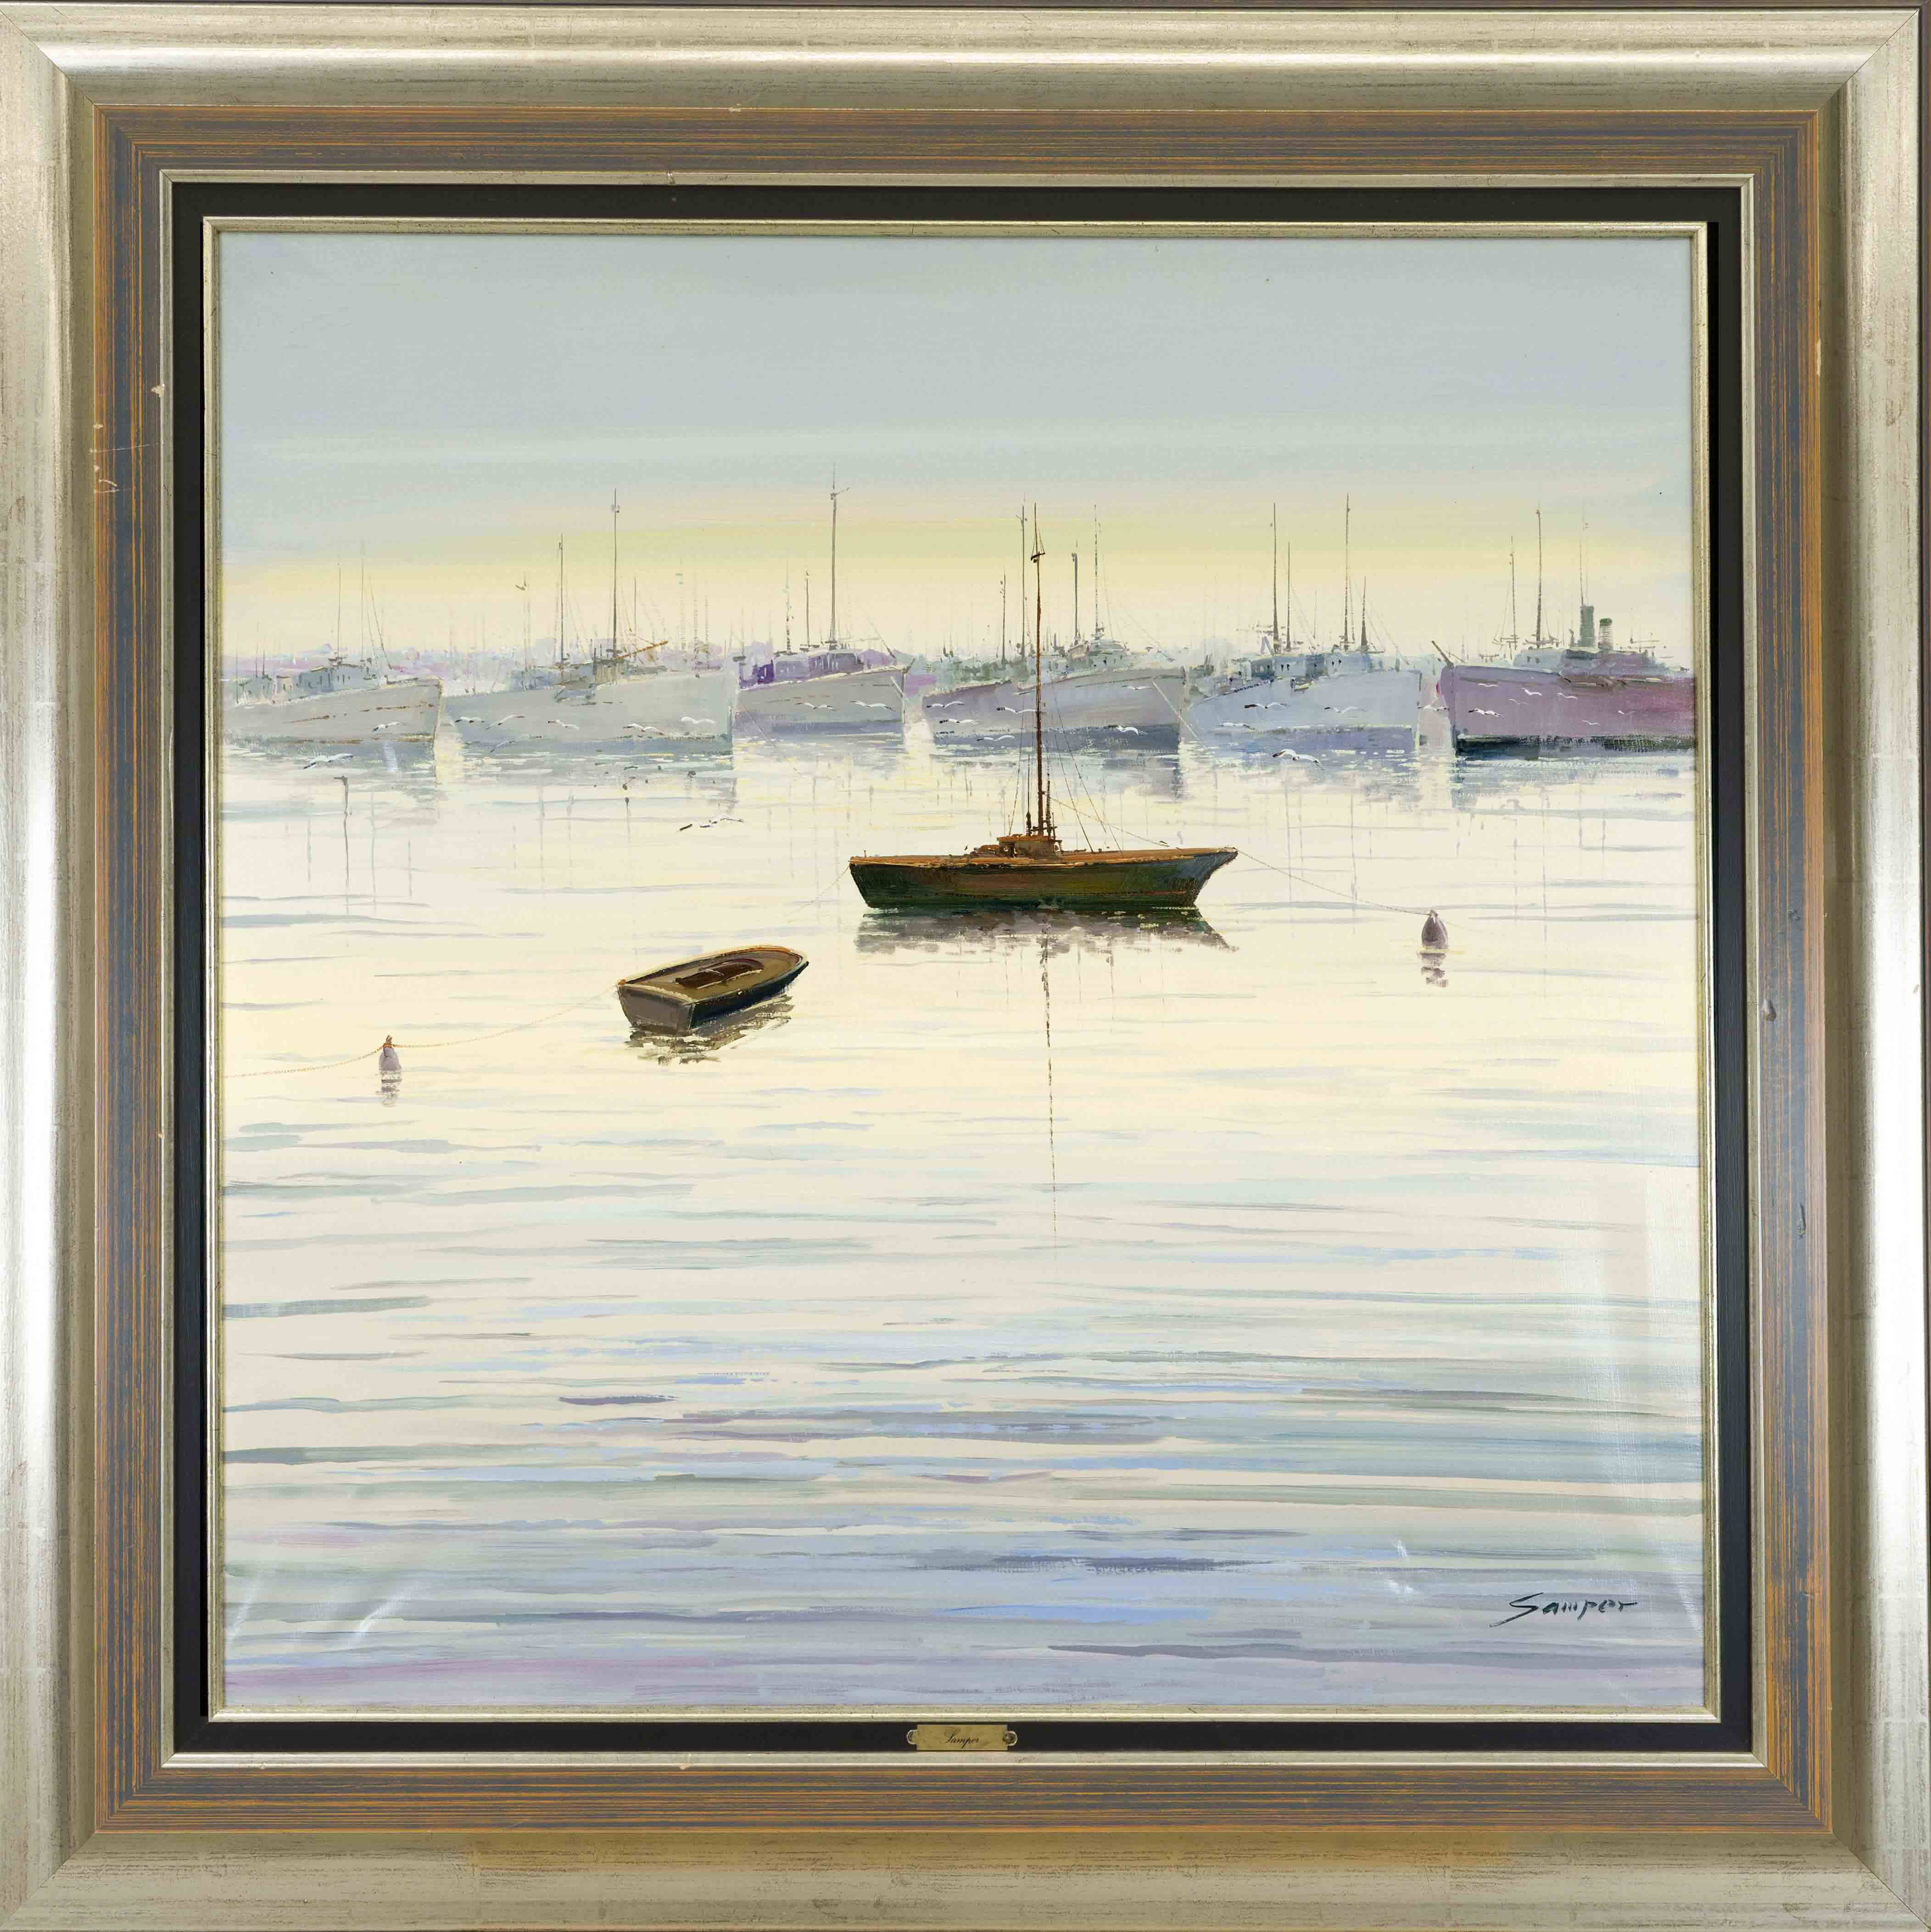 Signed Samper, late 20th century, large harbor scene, oil on canvas, signed lower right, pressure